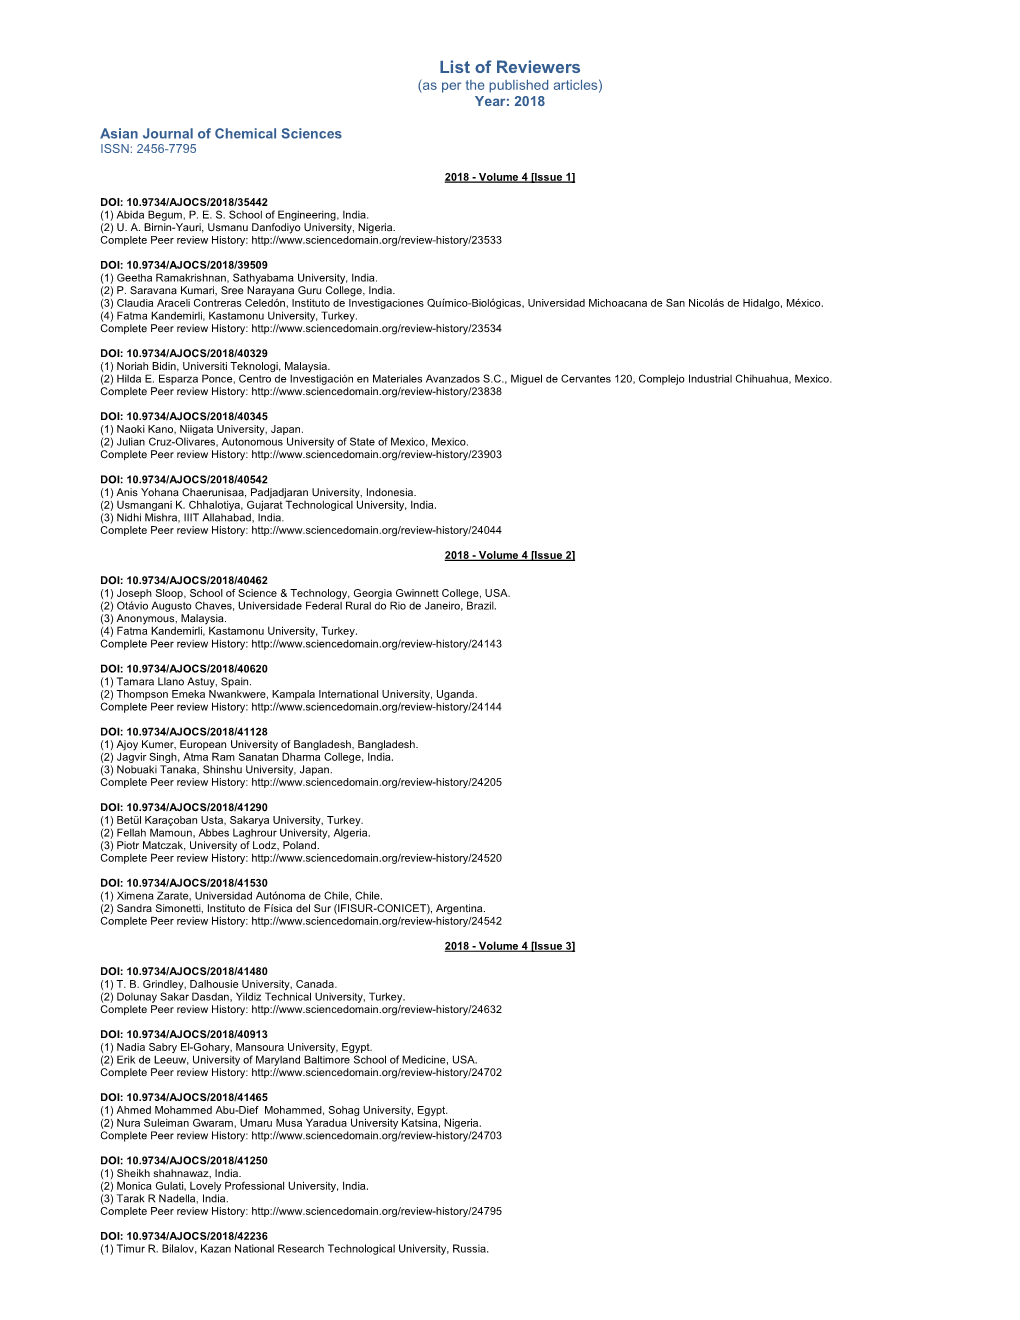 List of Reviewers (As Per the Published Articles) Year: 2018